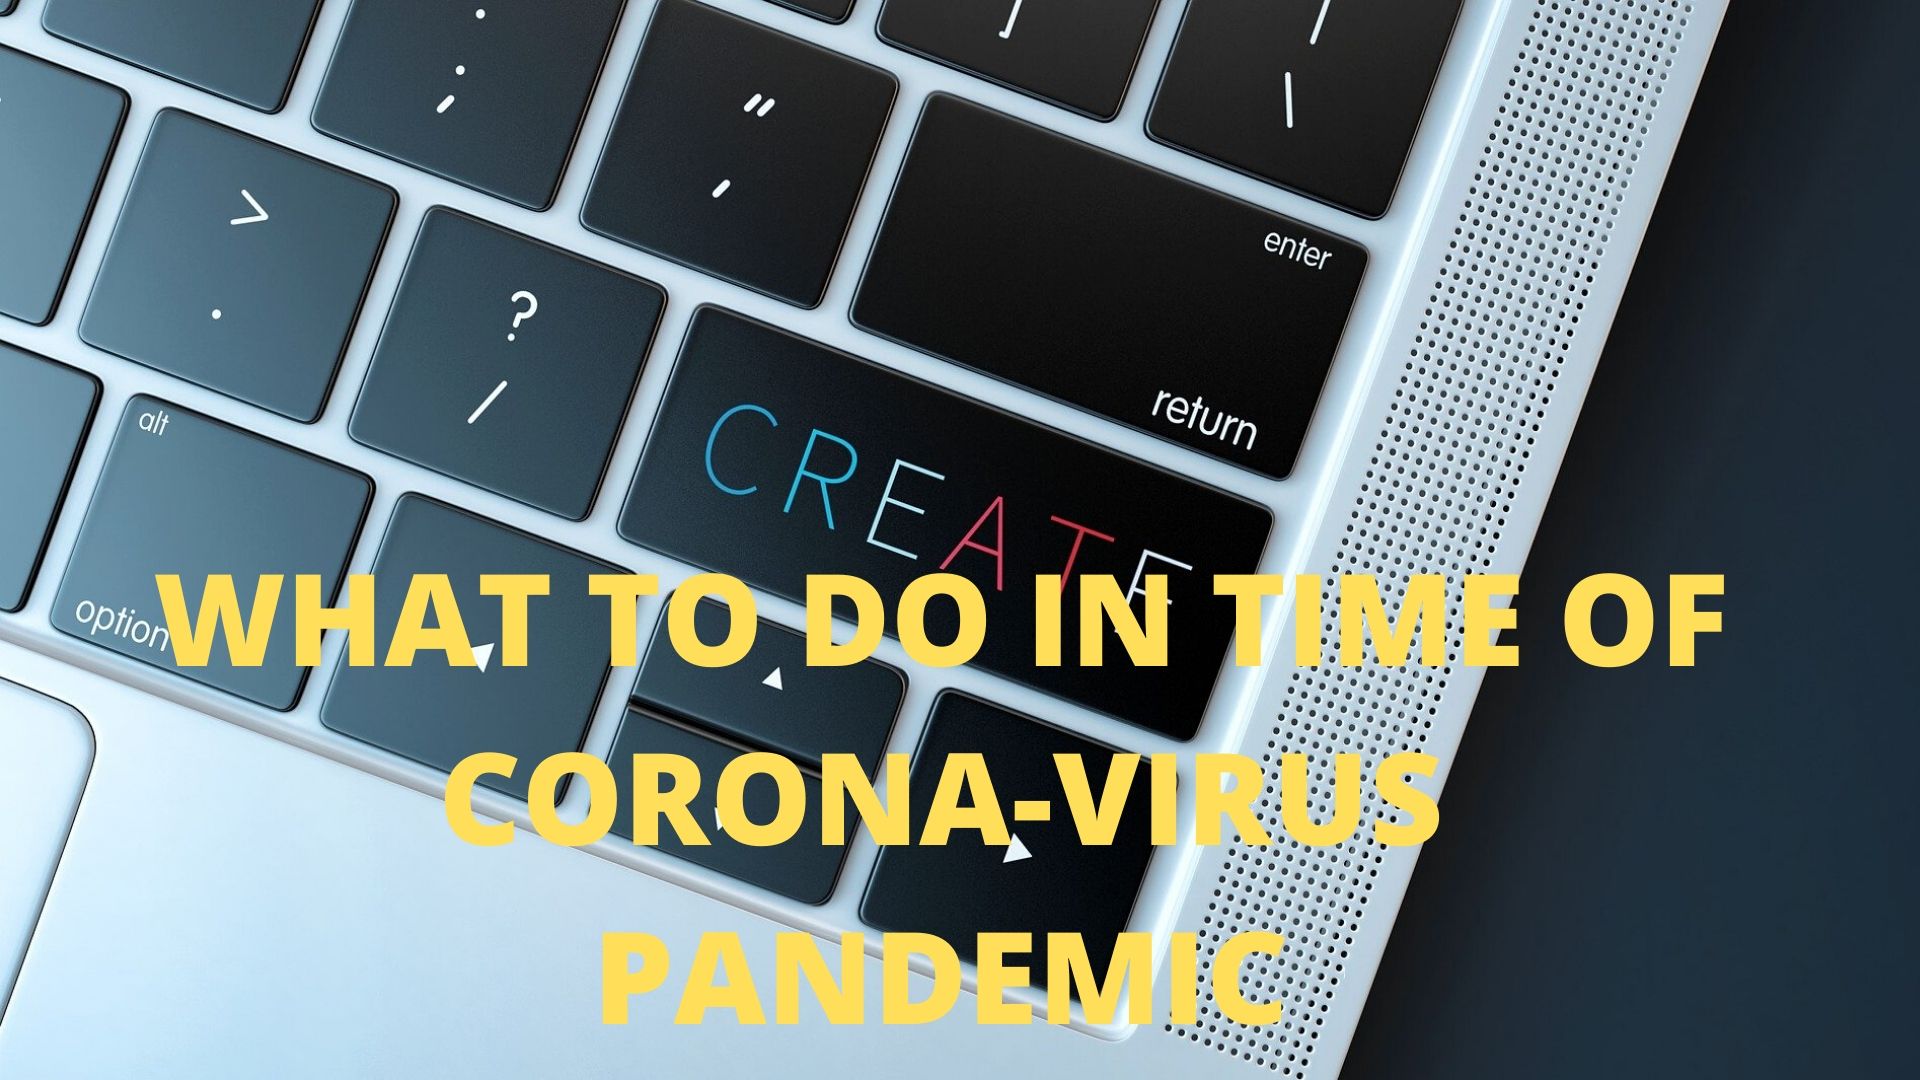 what to do in times of corona-virus pandemic